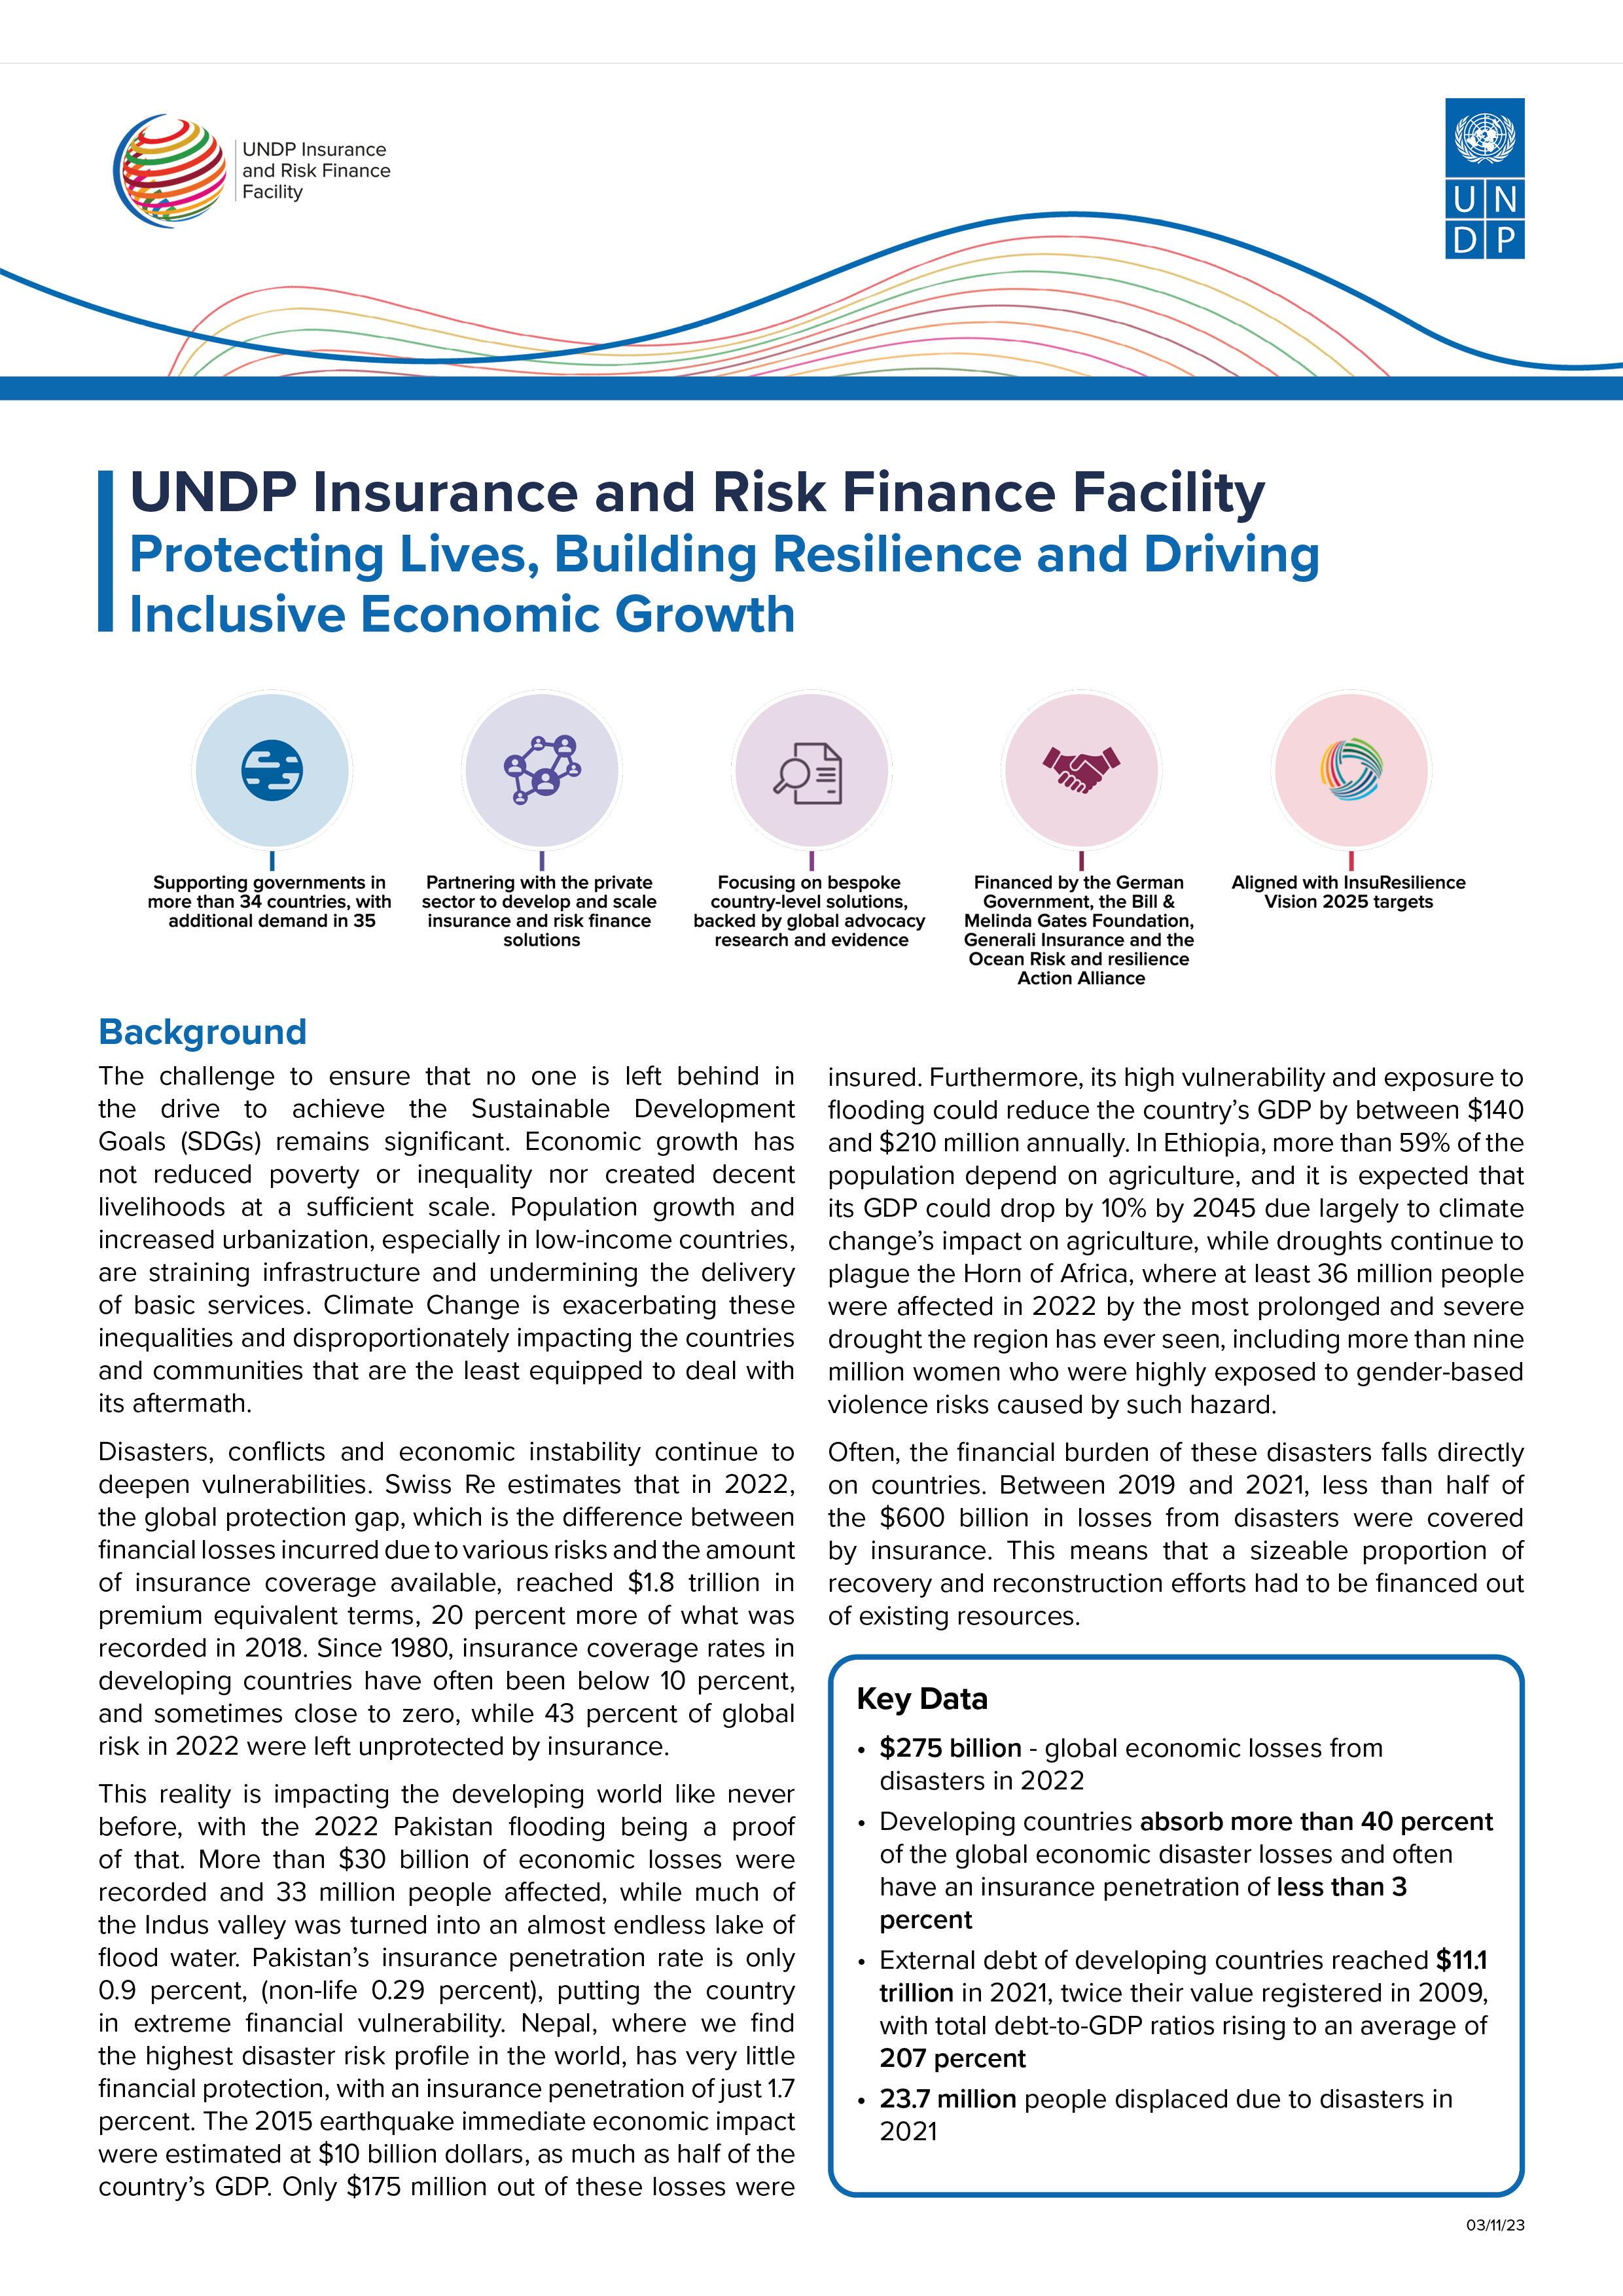 UNDP Insurance and Risk Finance Facility. Protecting Lives, Building Resilience and Driving  Inclusive Economic Growth